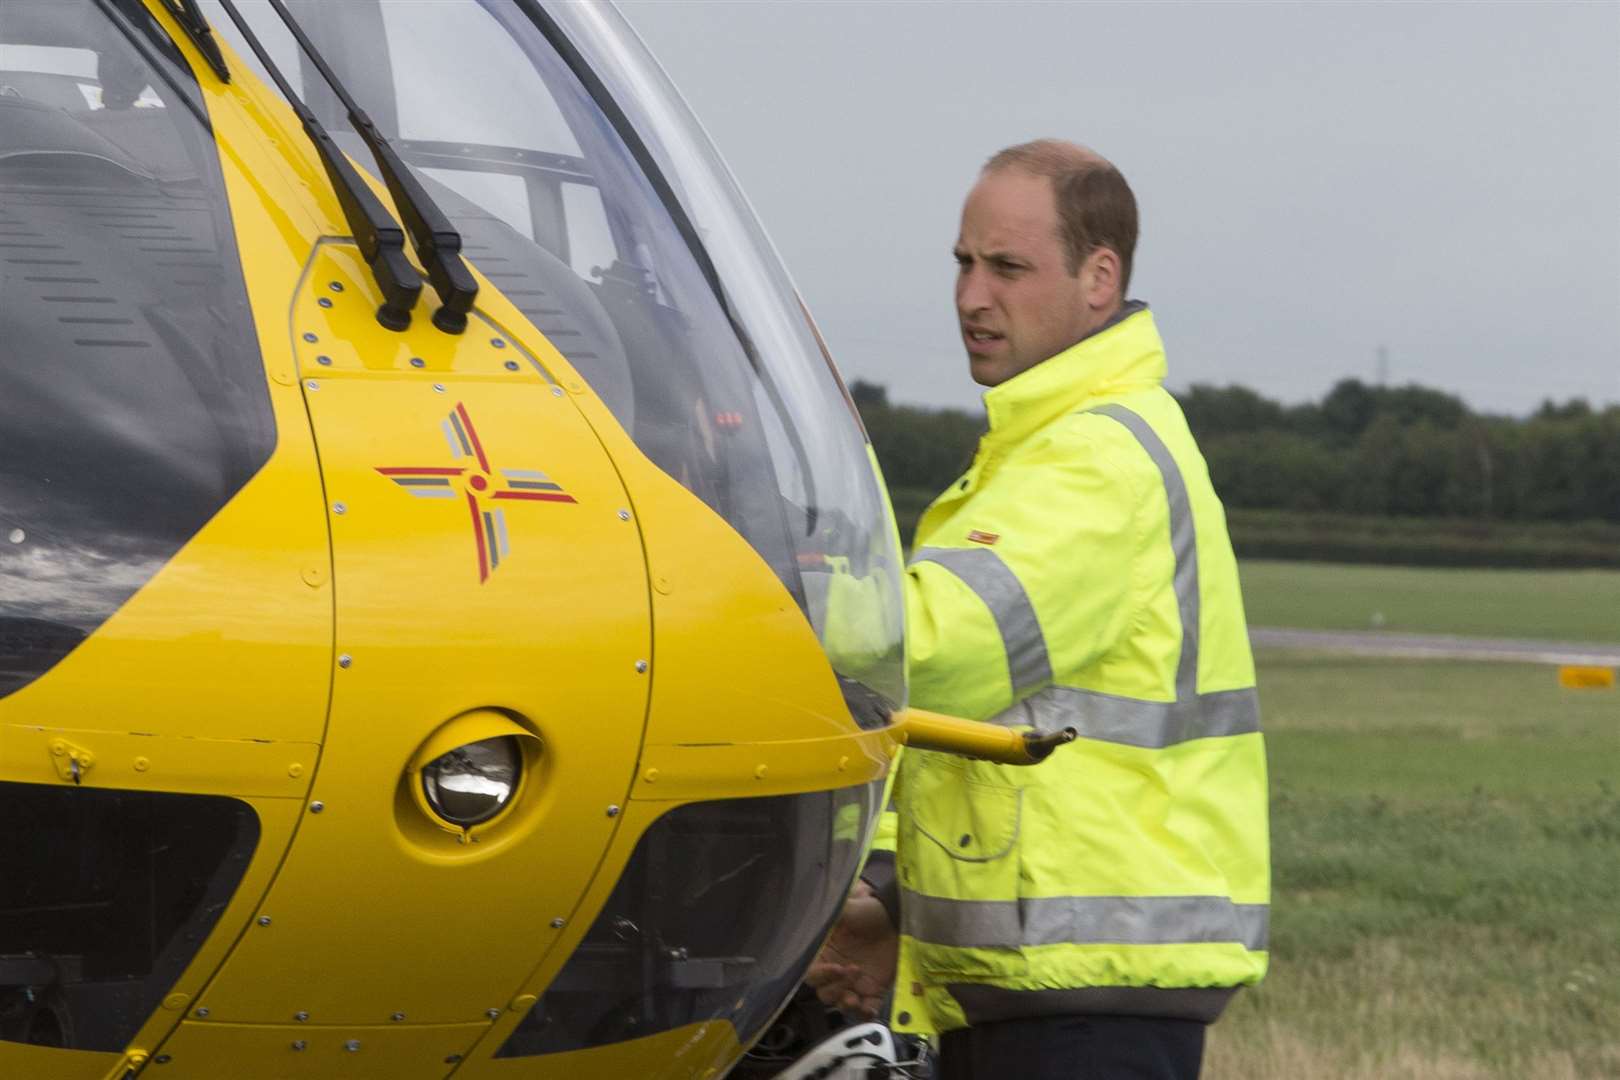 William served for two years as an air ambulance helicopter pilot (Heathcliff O’Malley/The Daily Telegraph)